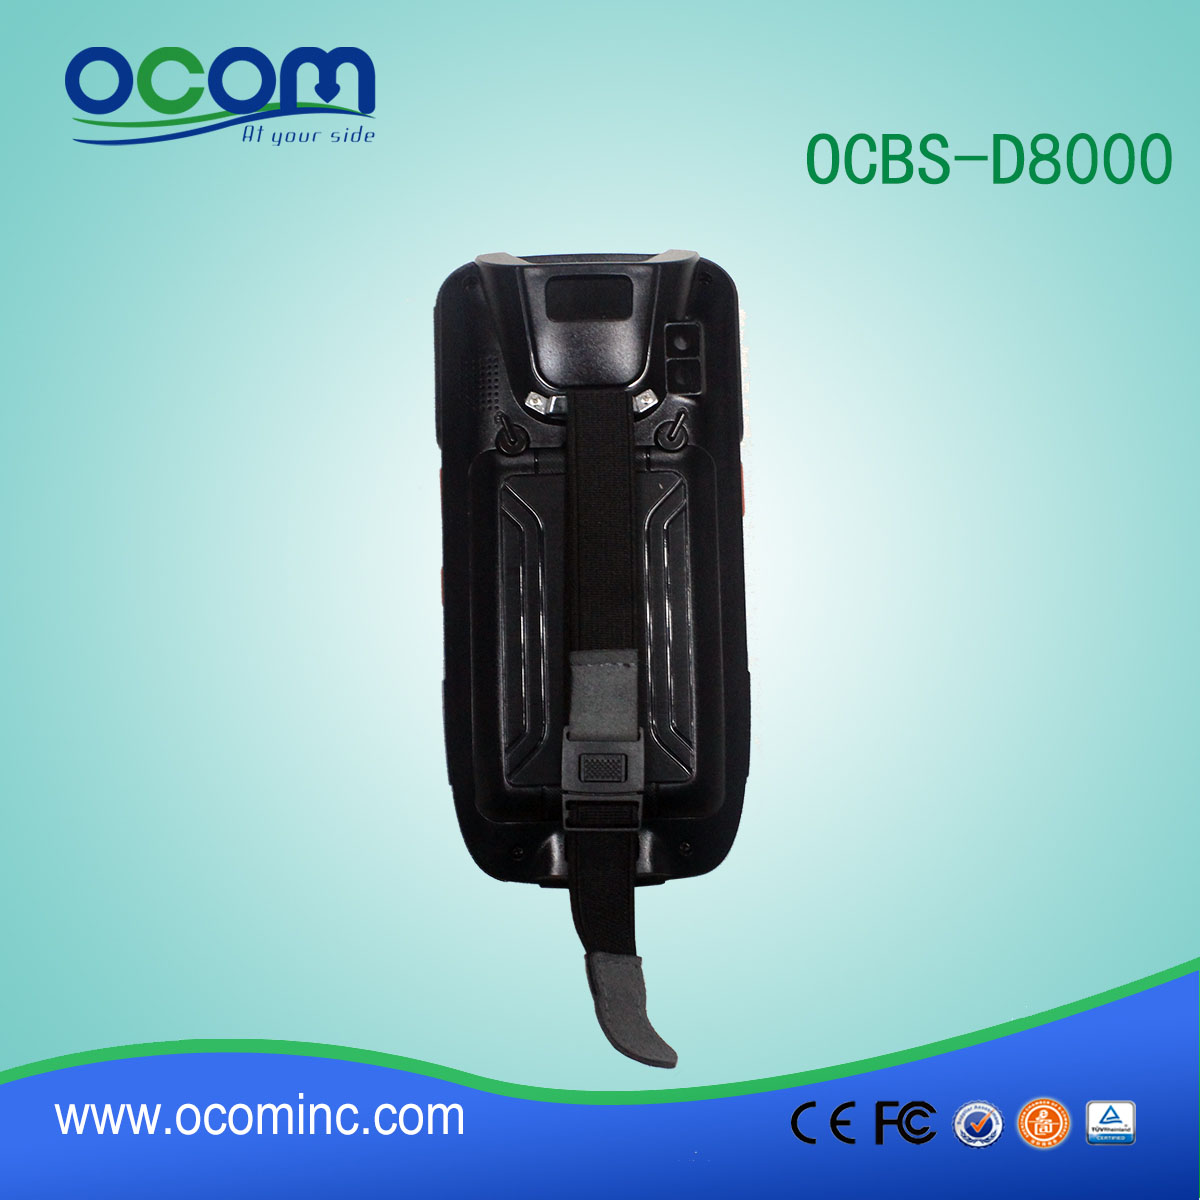 OCBS-D8000 android pda Barcode-Laserscanner